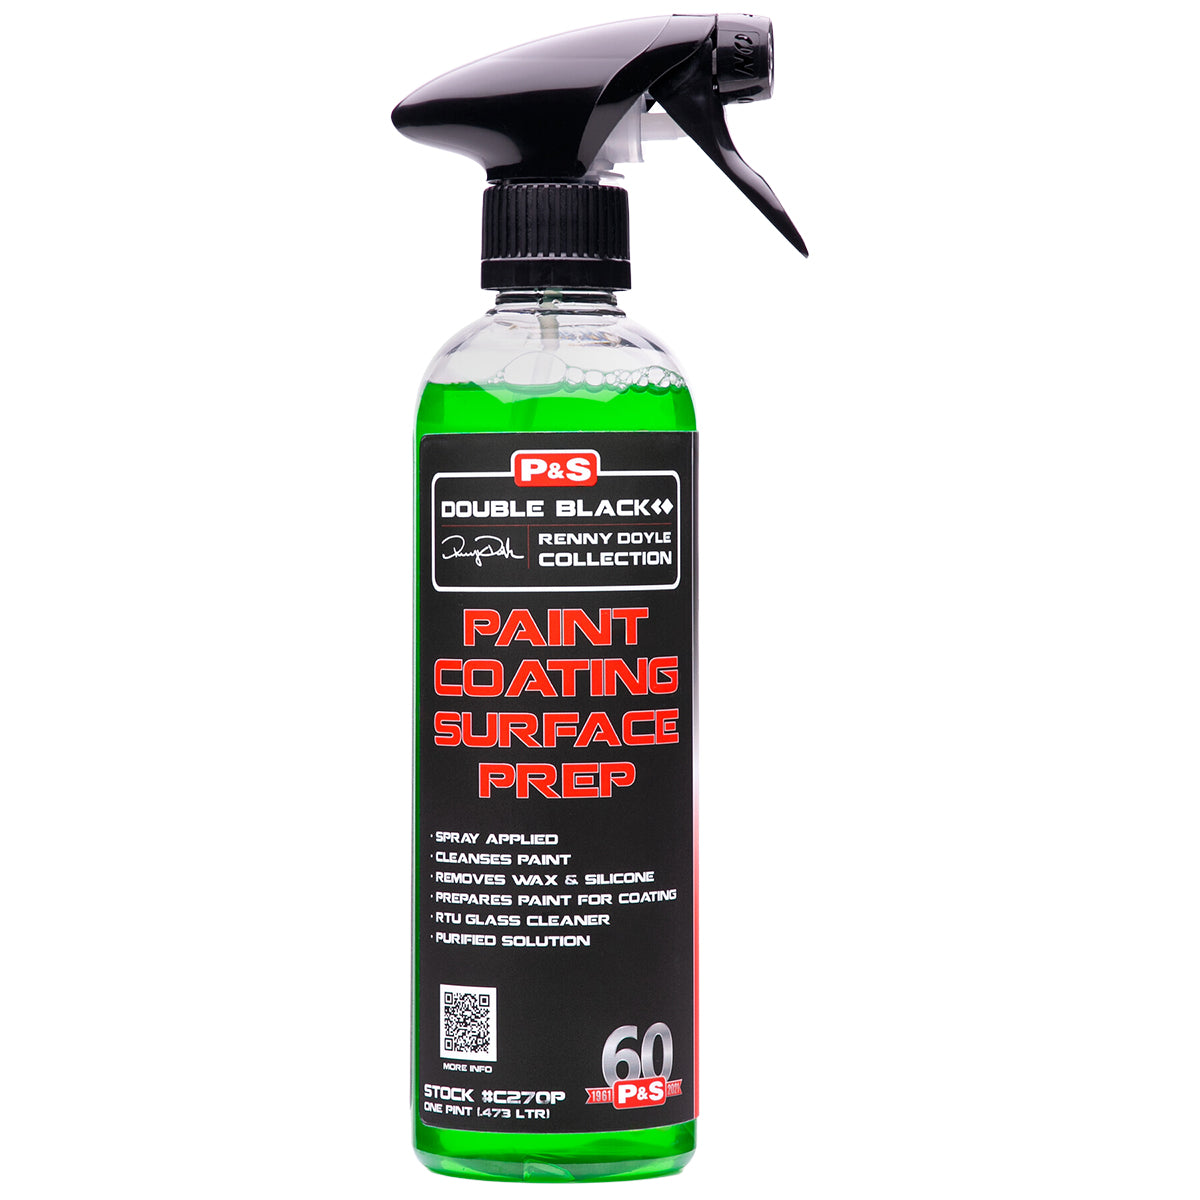 P&S Paint Coating Surface Prep & Glass Cleaner 473ml